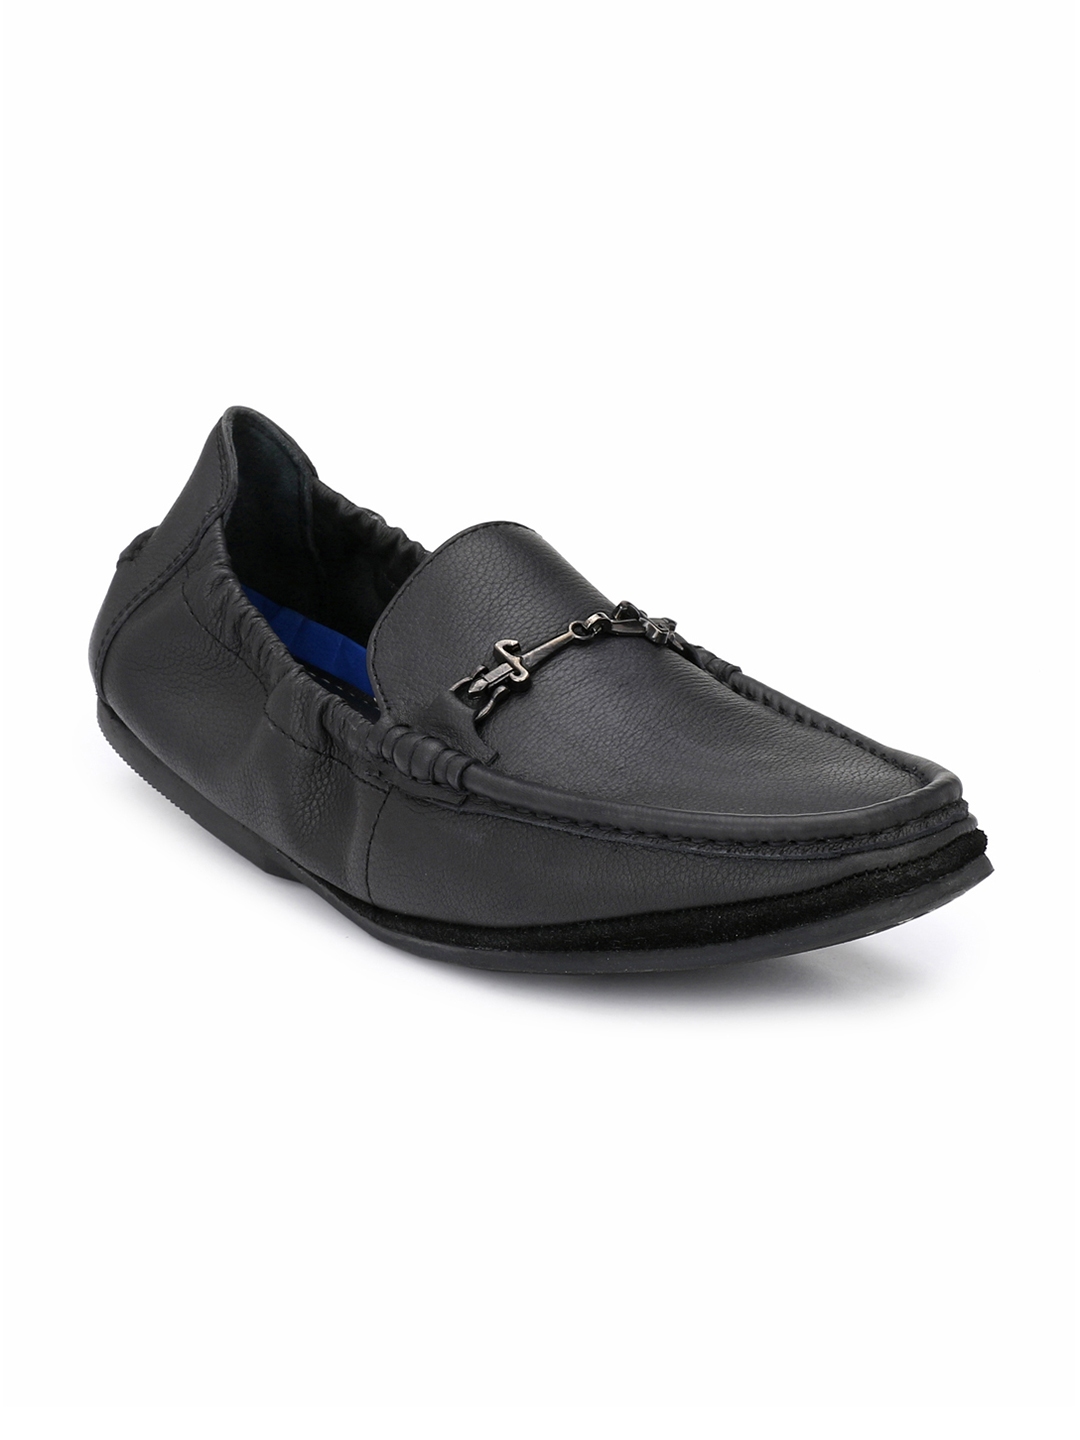 Buy Derby Men Black Leather Loafers - Casual Shoes for Men 4444579 | Myntra